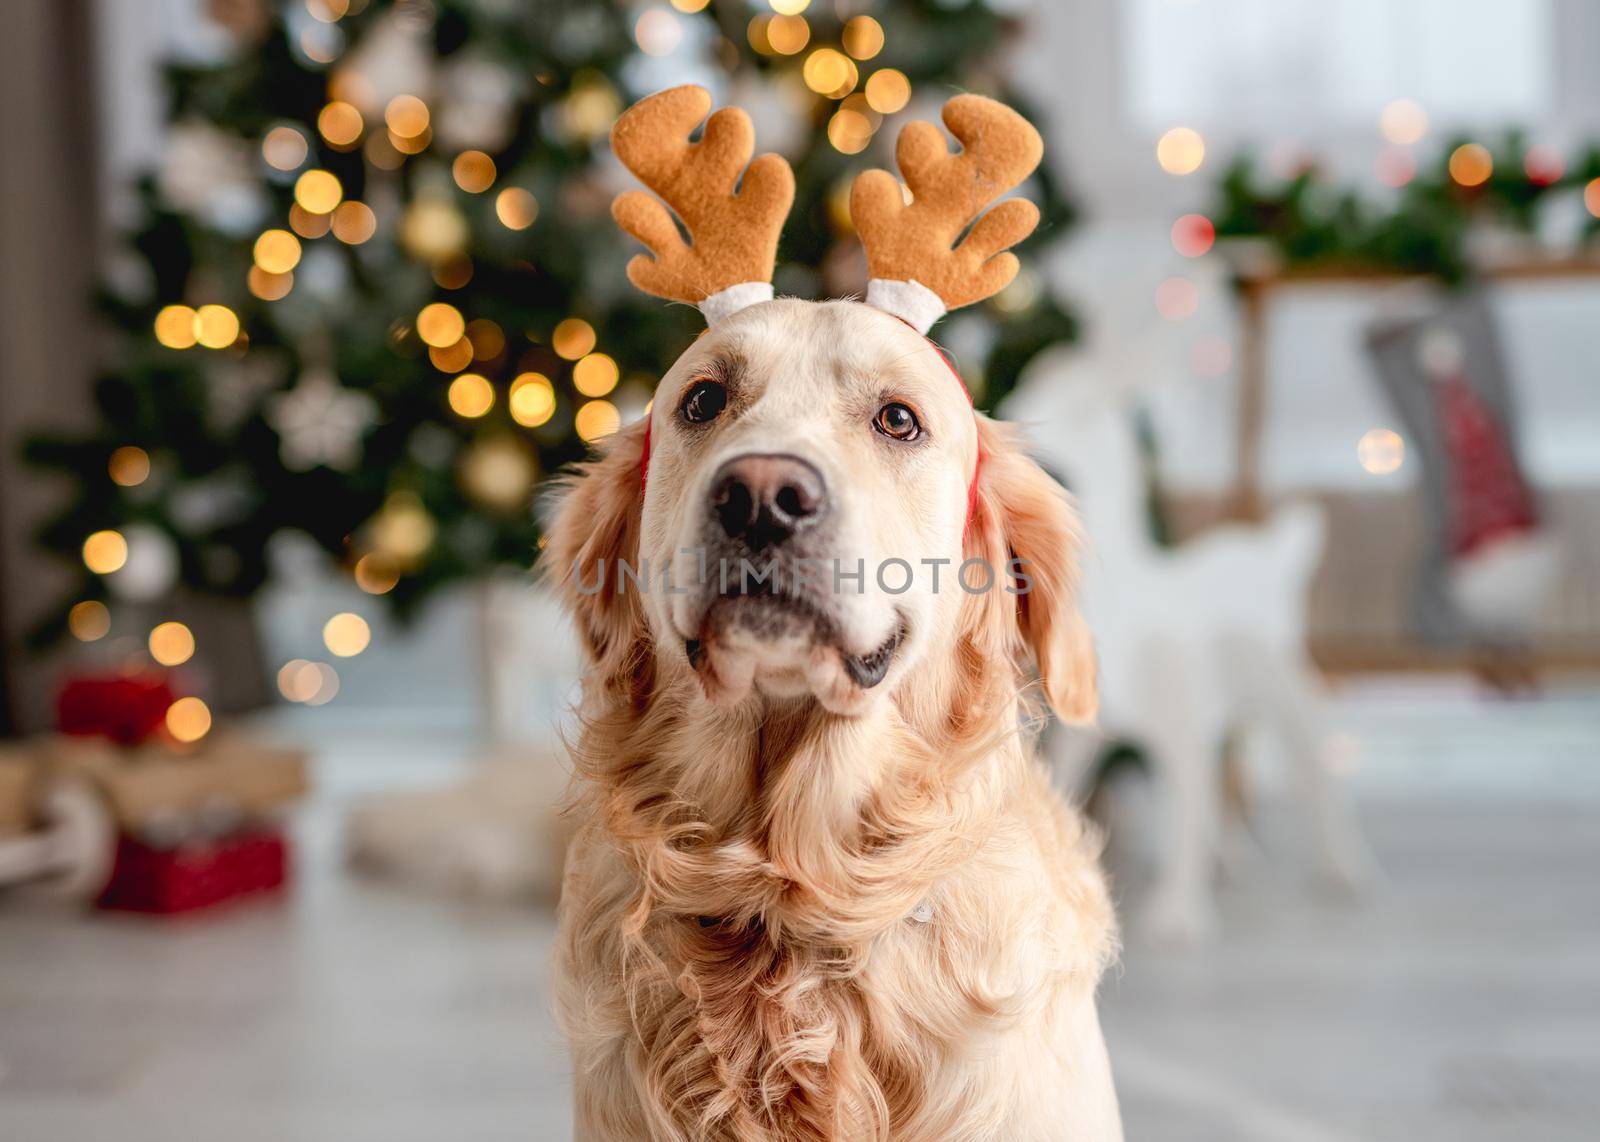 Golden retriever dog wearing festive costume sitting in Christmas time with decorated tree on background